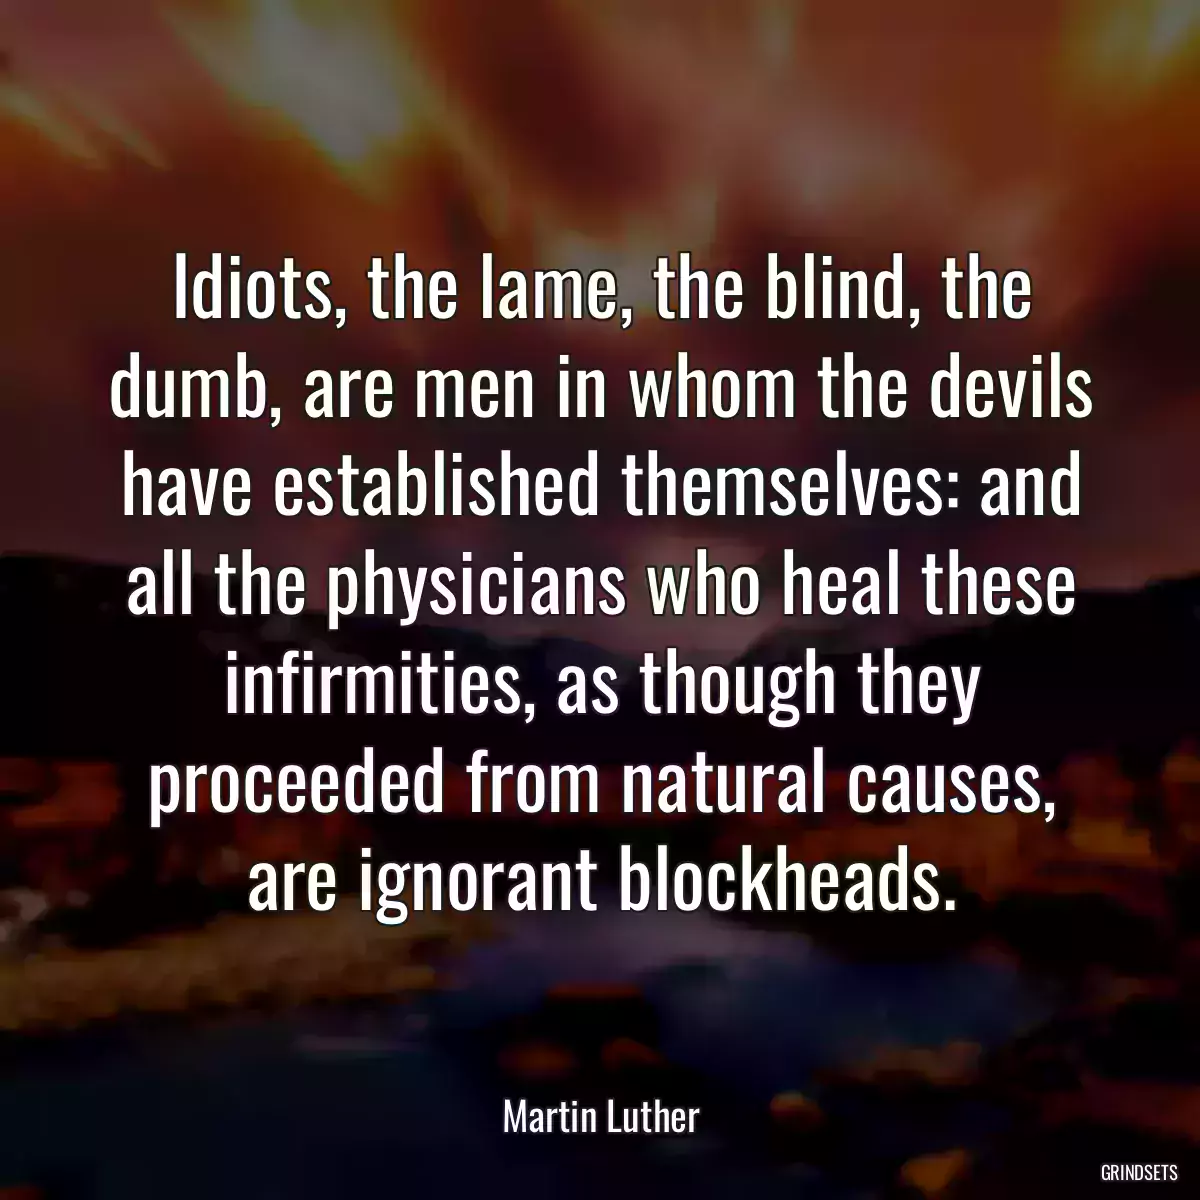 Idiots, the lame, the blind, the dumb, are men in whom the devils have established themselves: and all the physicians who heal these infirmities, as though they proceeded from natural causes, are ignorant blockheads.